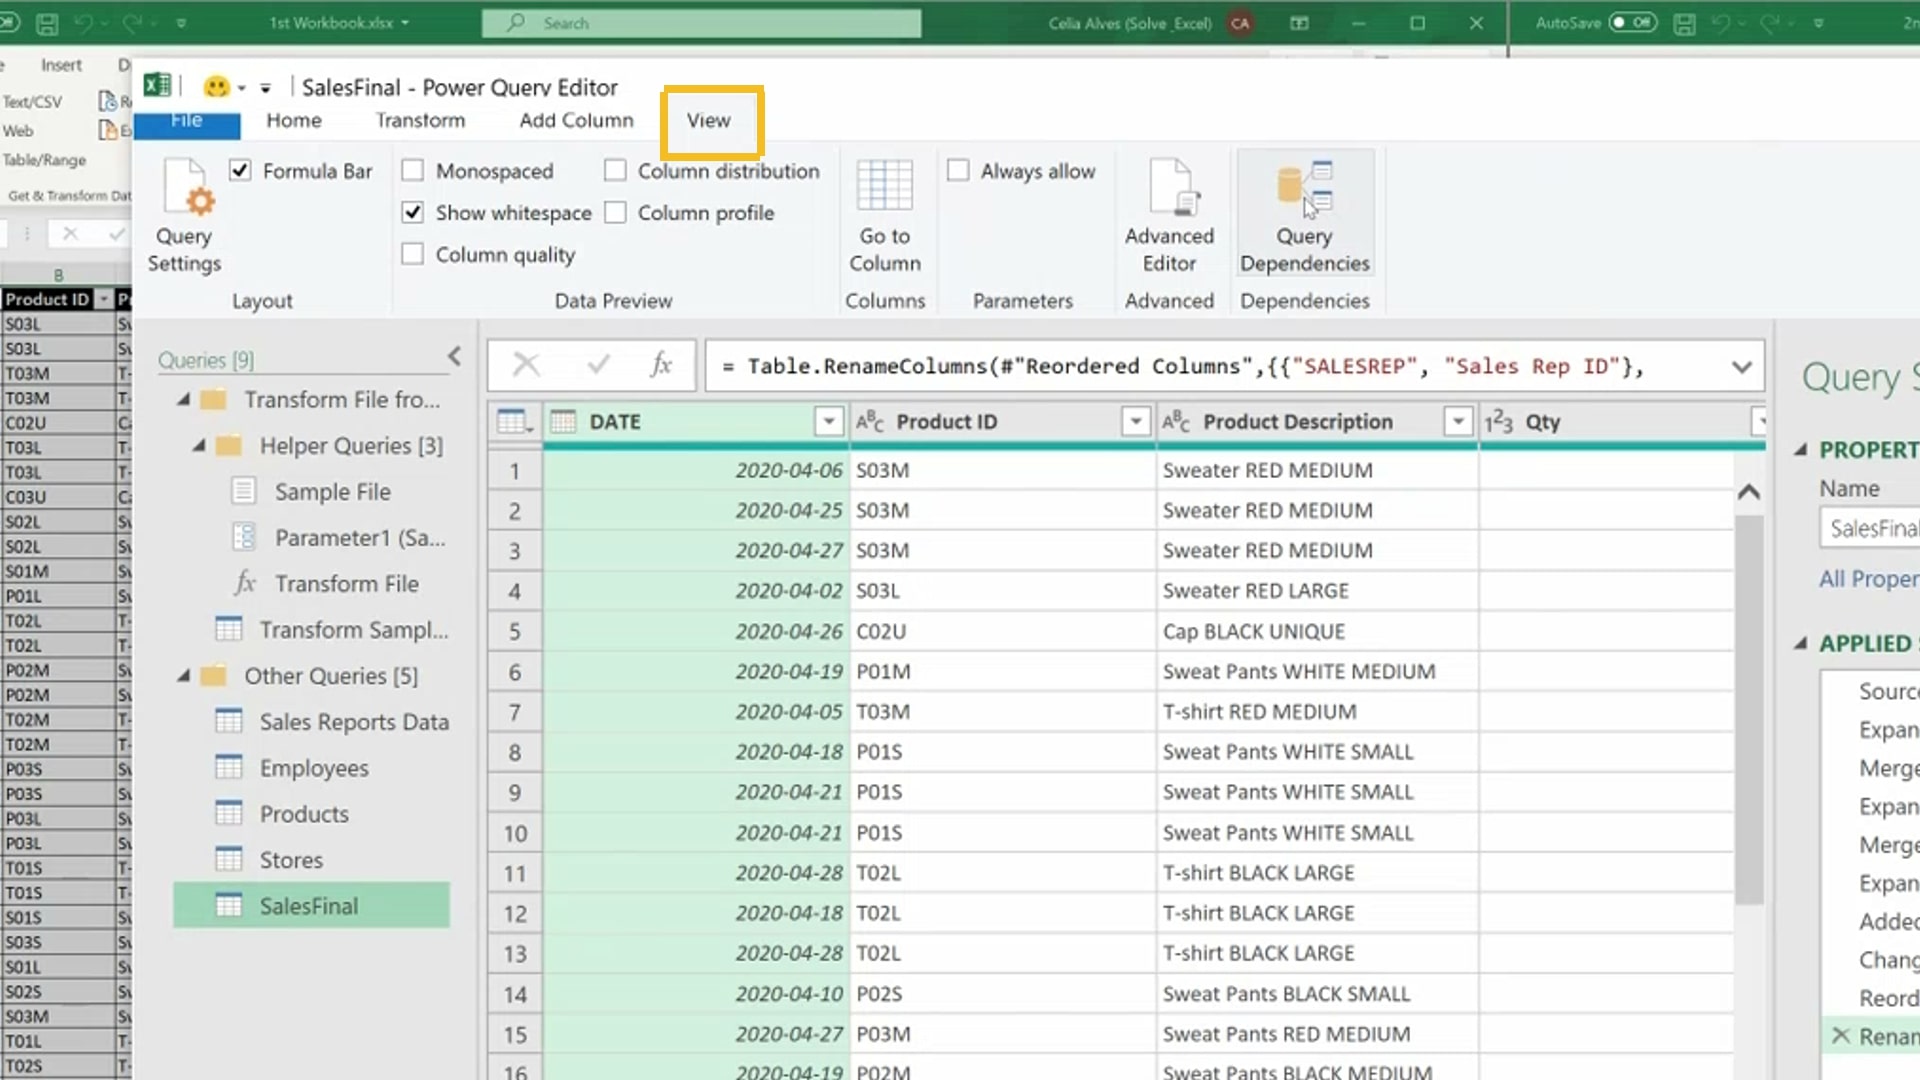 How to Copy a Power Query query from one Excel workbook to another one